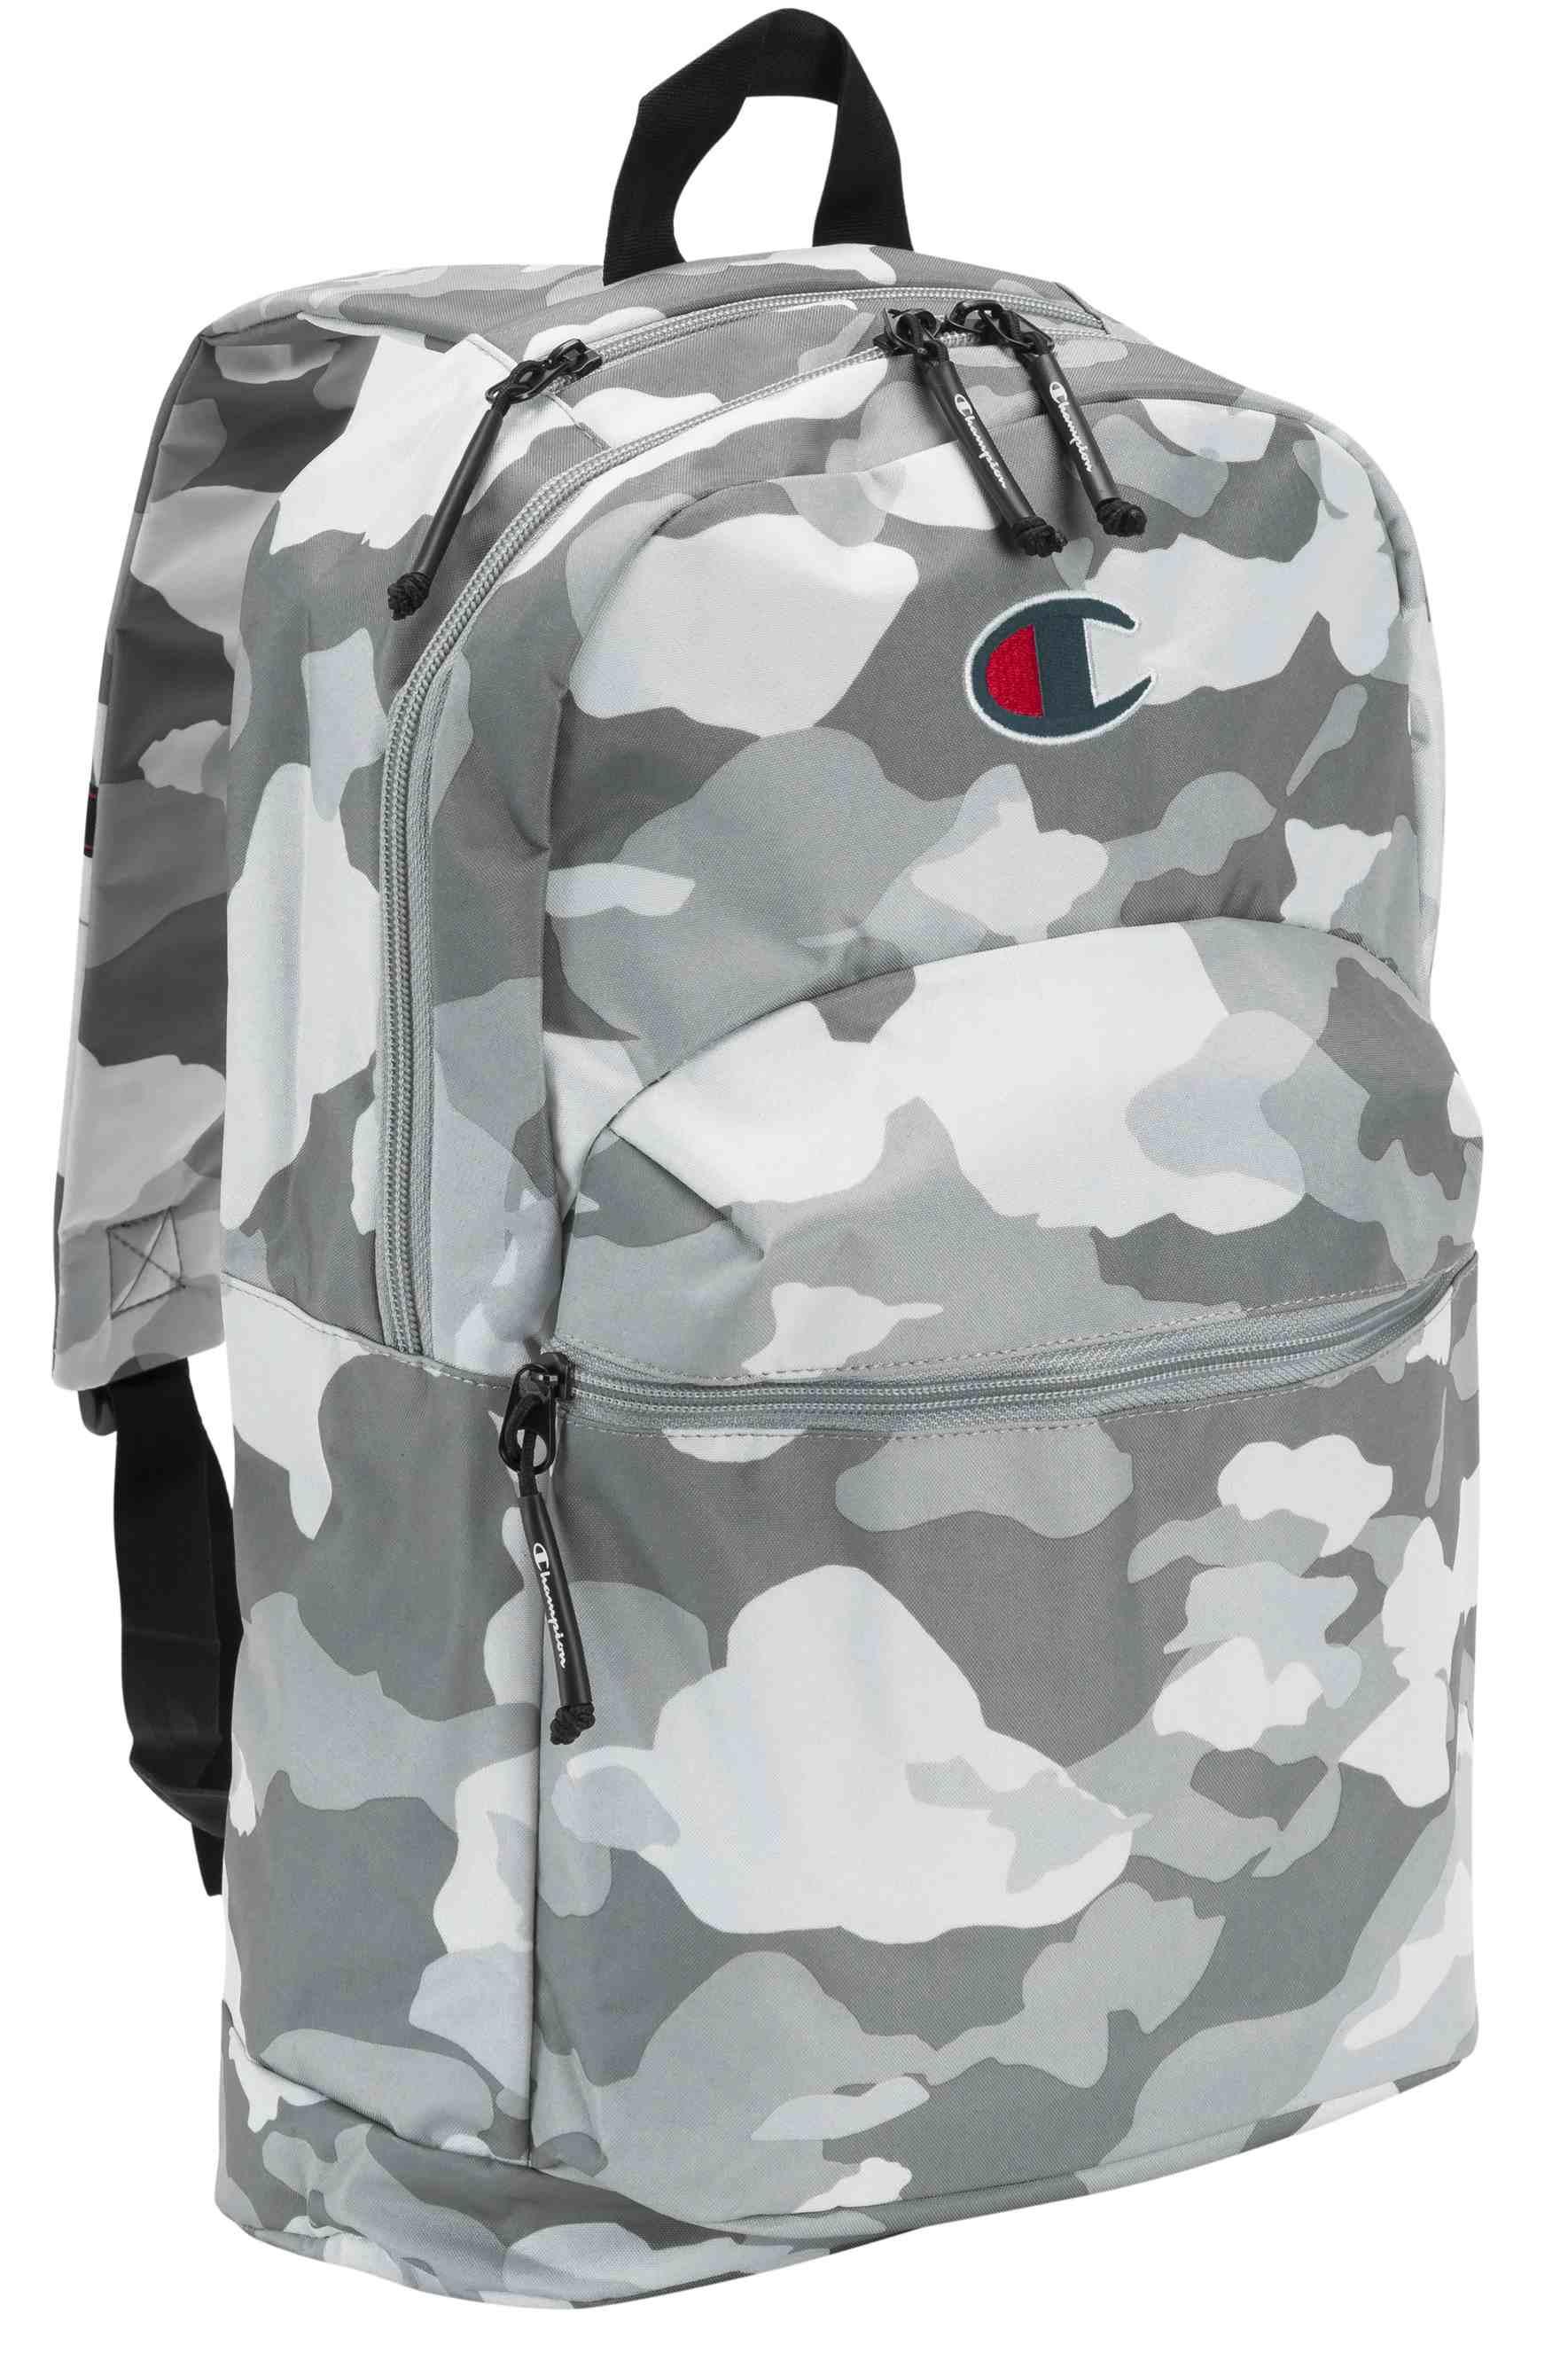  Champion Backpack - The Supercize